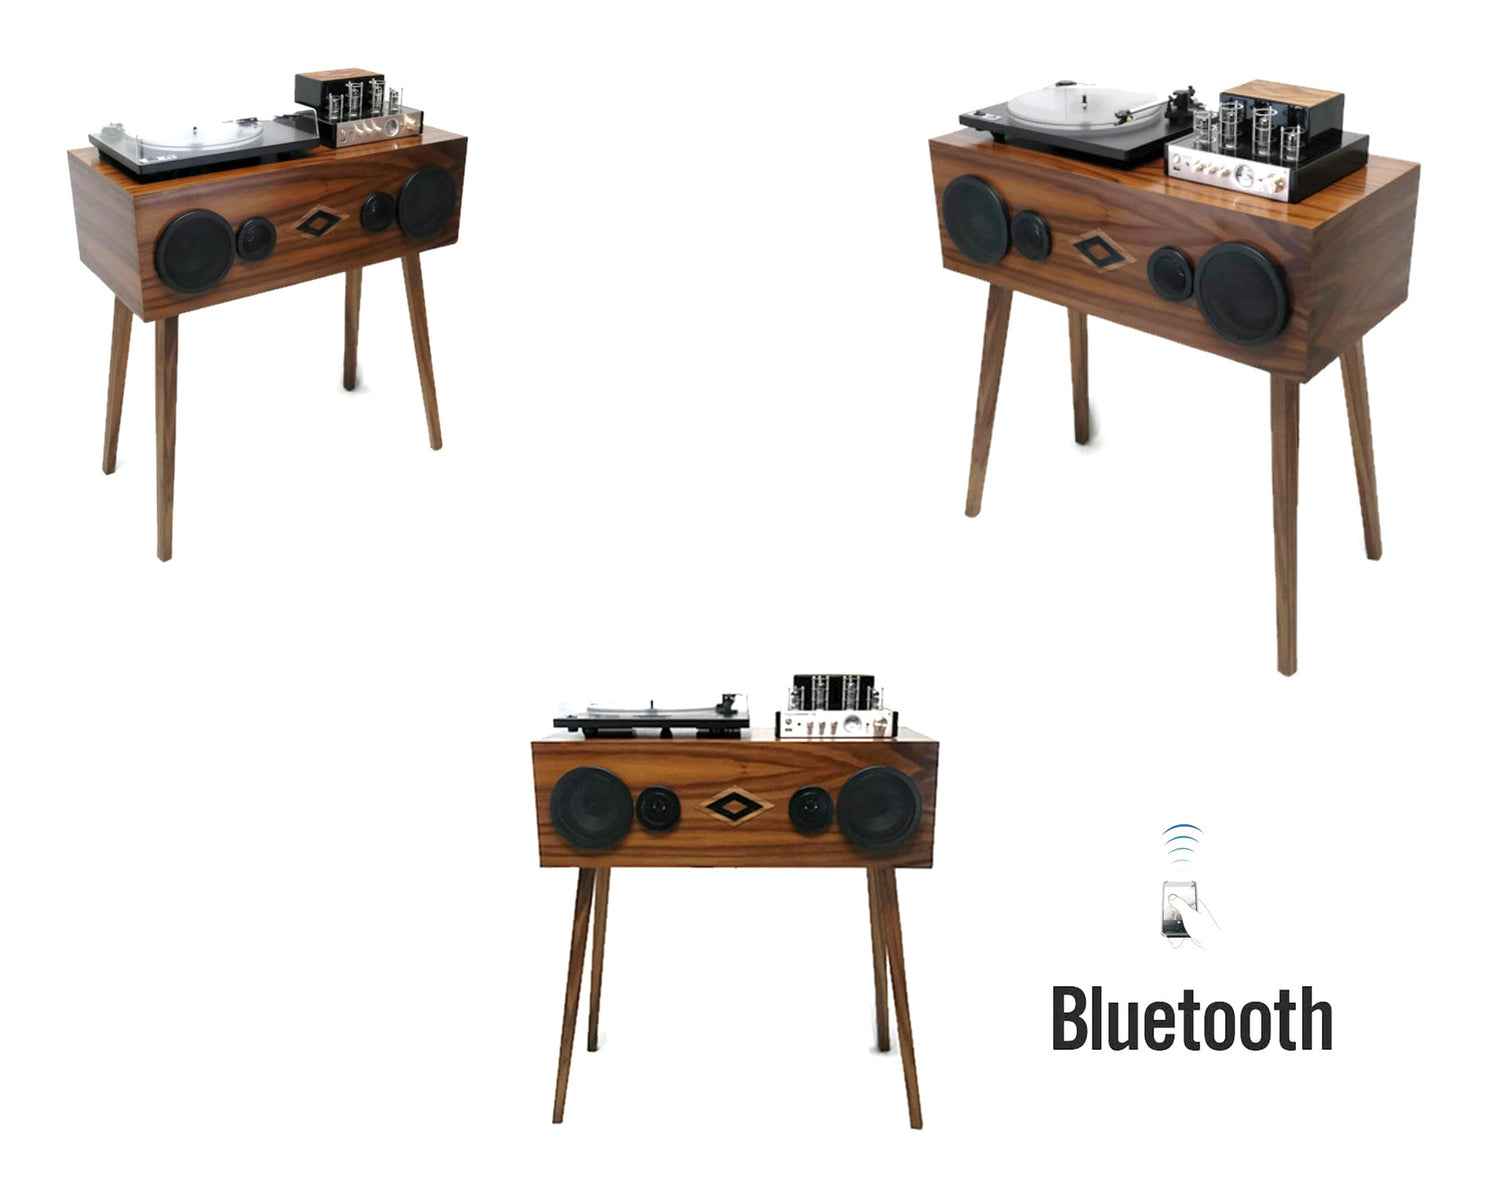 **SOLD OUT** VintedgeCo™ - EXCLUSIVE CUSTOM SERIES -  Mini-PREMIER™ Console Record Player in WALNUT - Turntable - Tube Amplifier - Bluetooth The Vintedge Co.